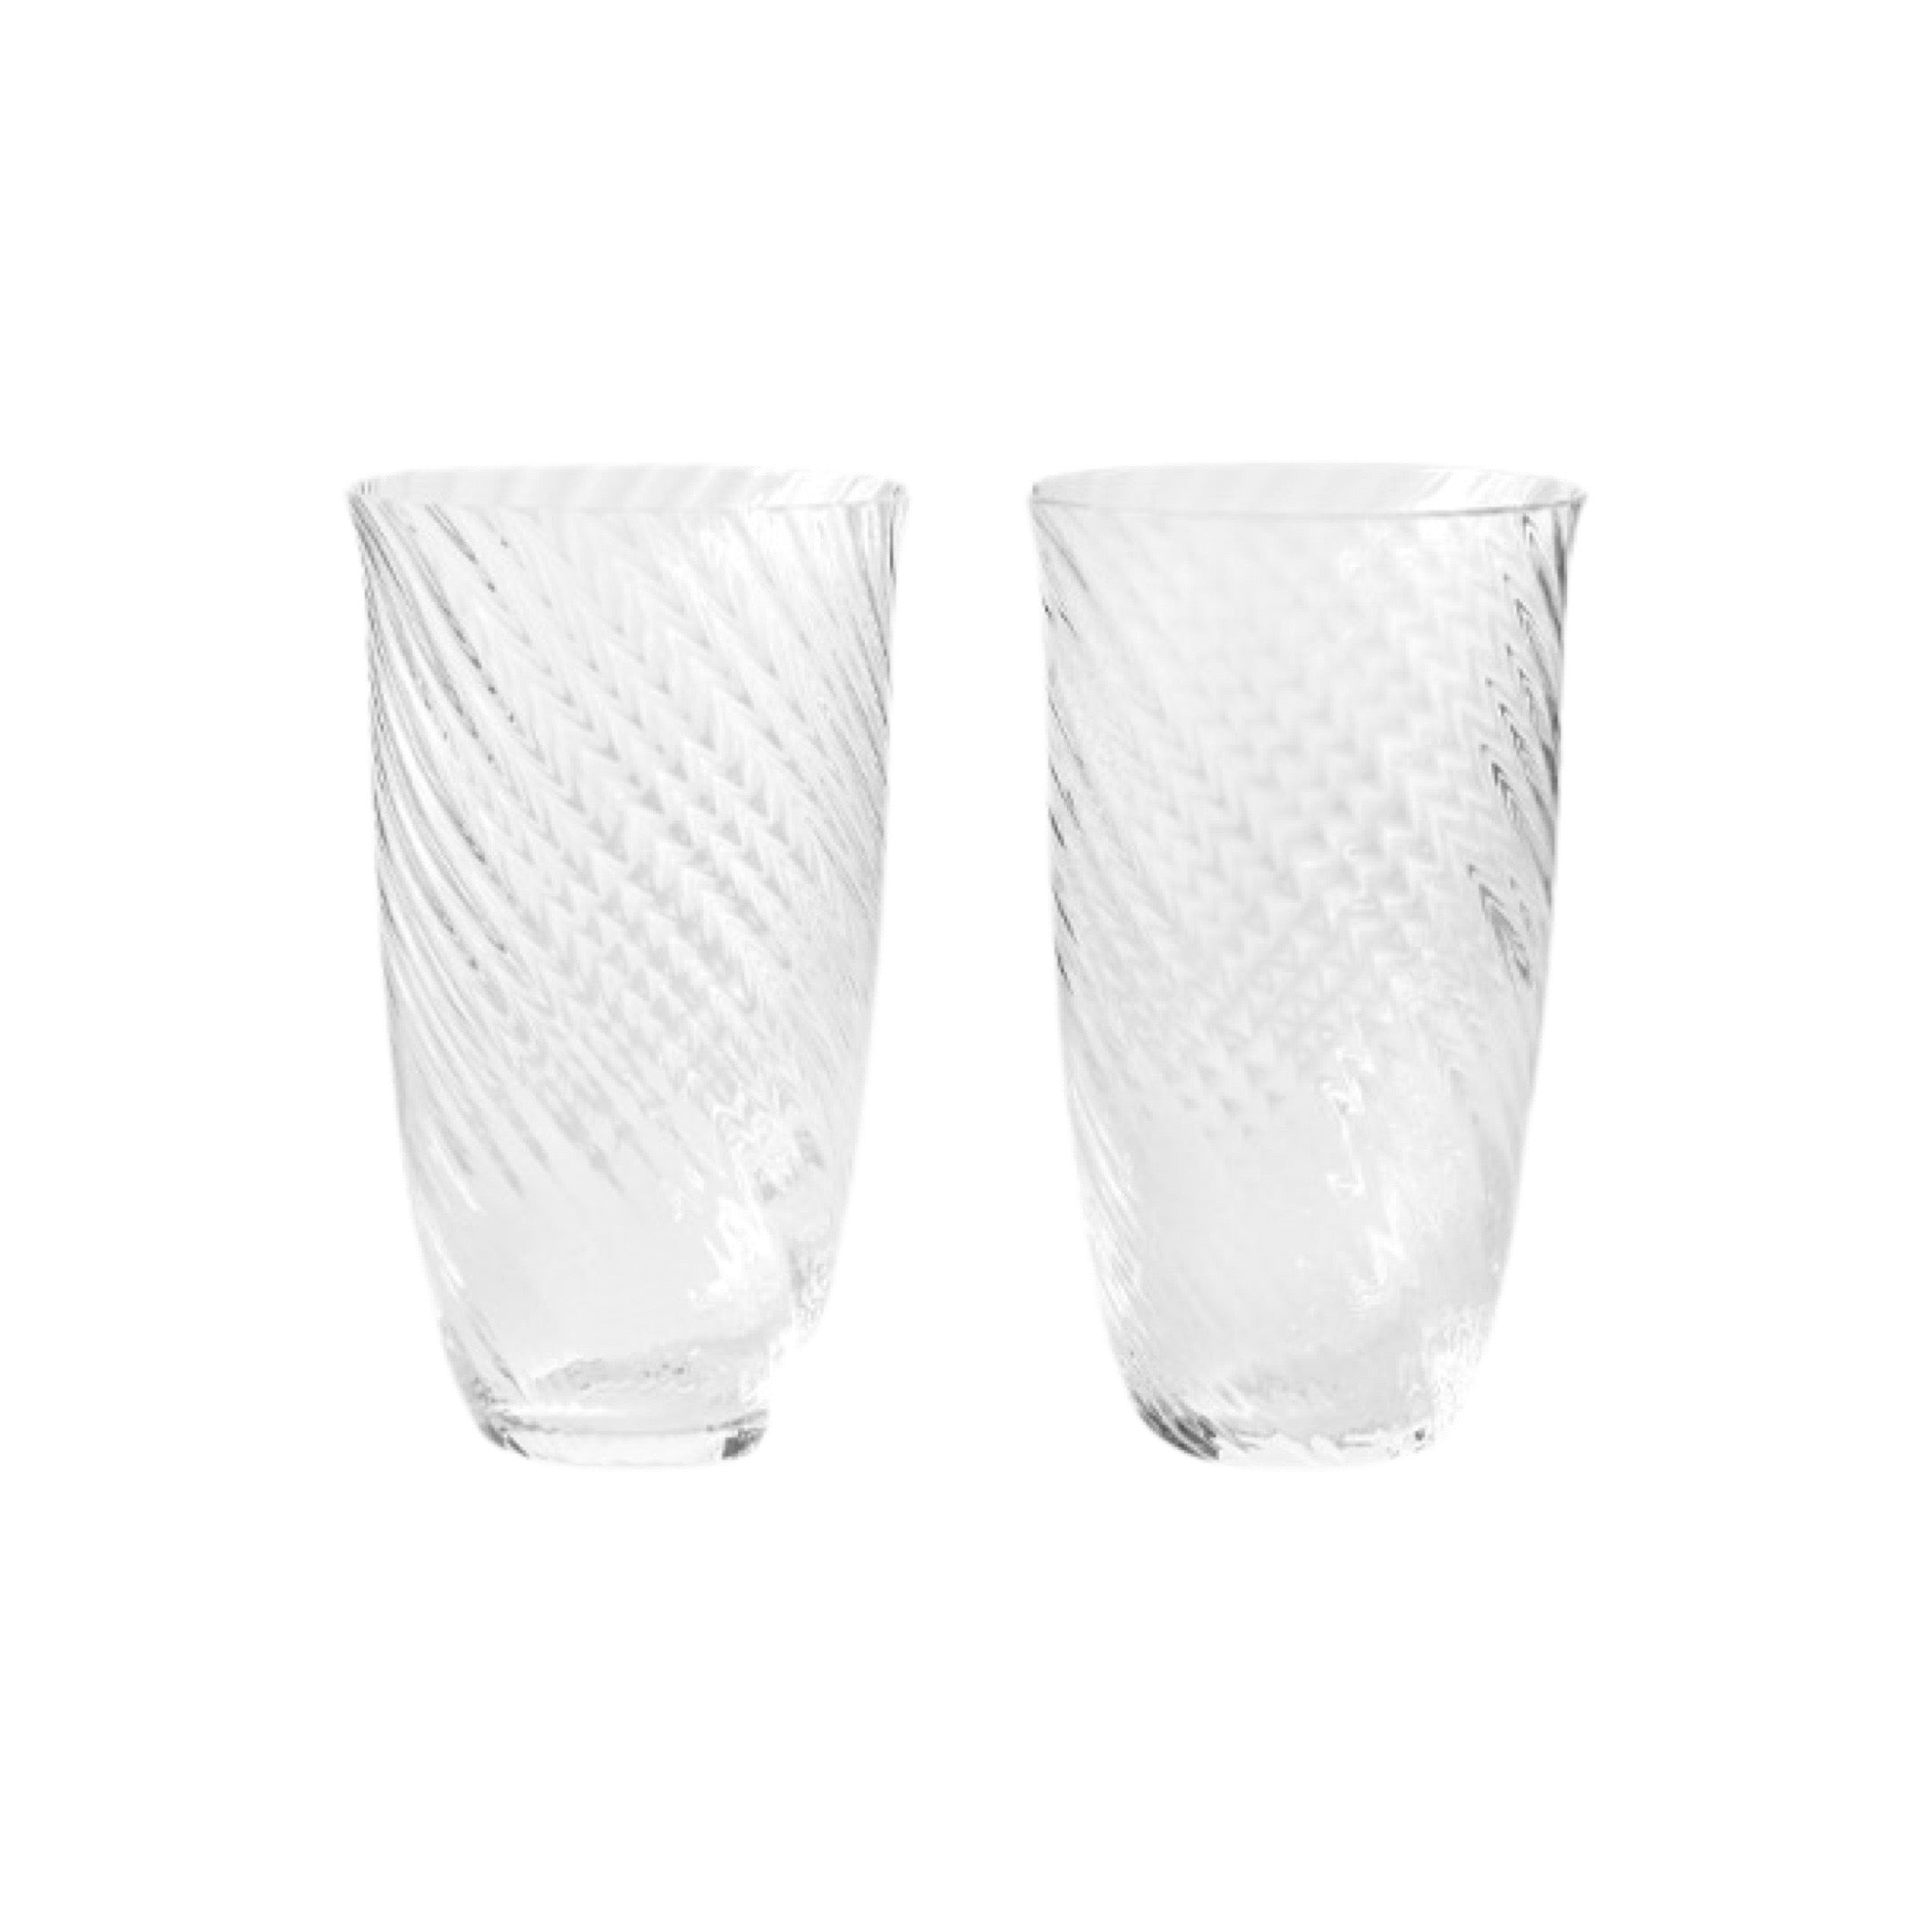 &Tradition Collect SC60 Drinking Glass - 165ml (Set of 2)